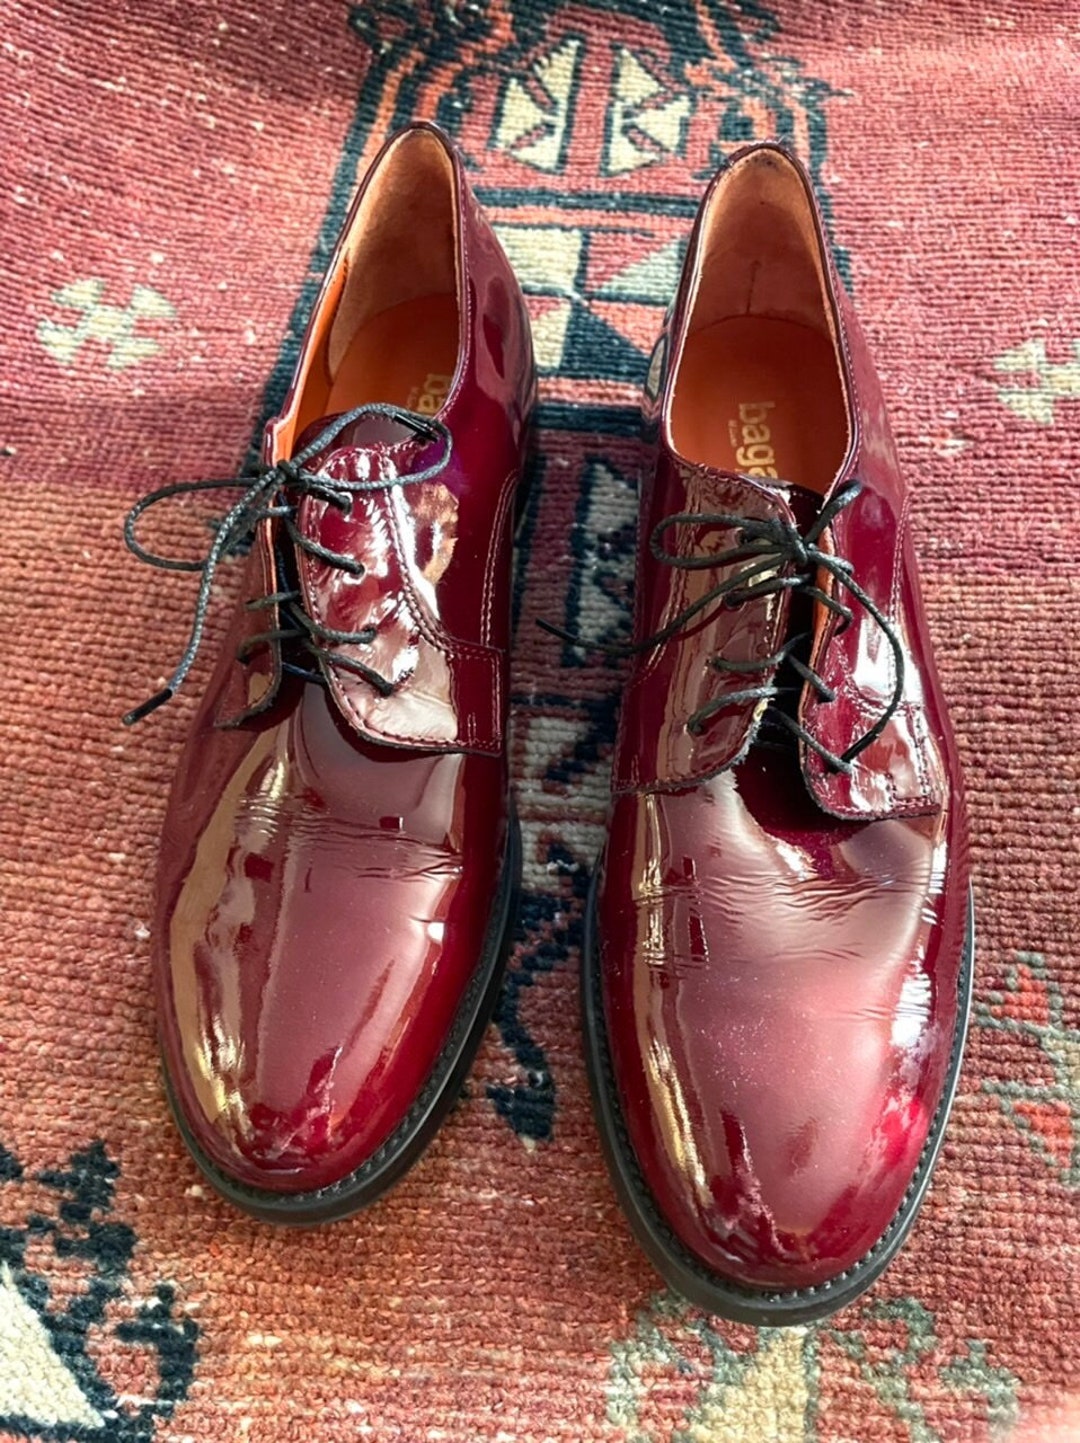 Unisex red patent leather made in Italy oxfords by Bagatt - Etsy Schweiz